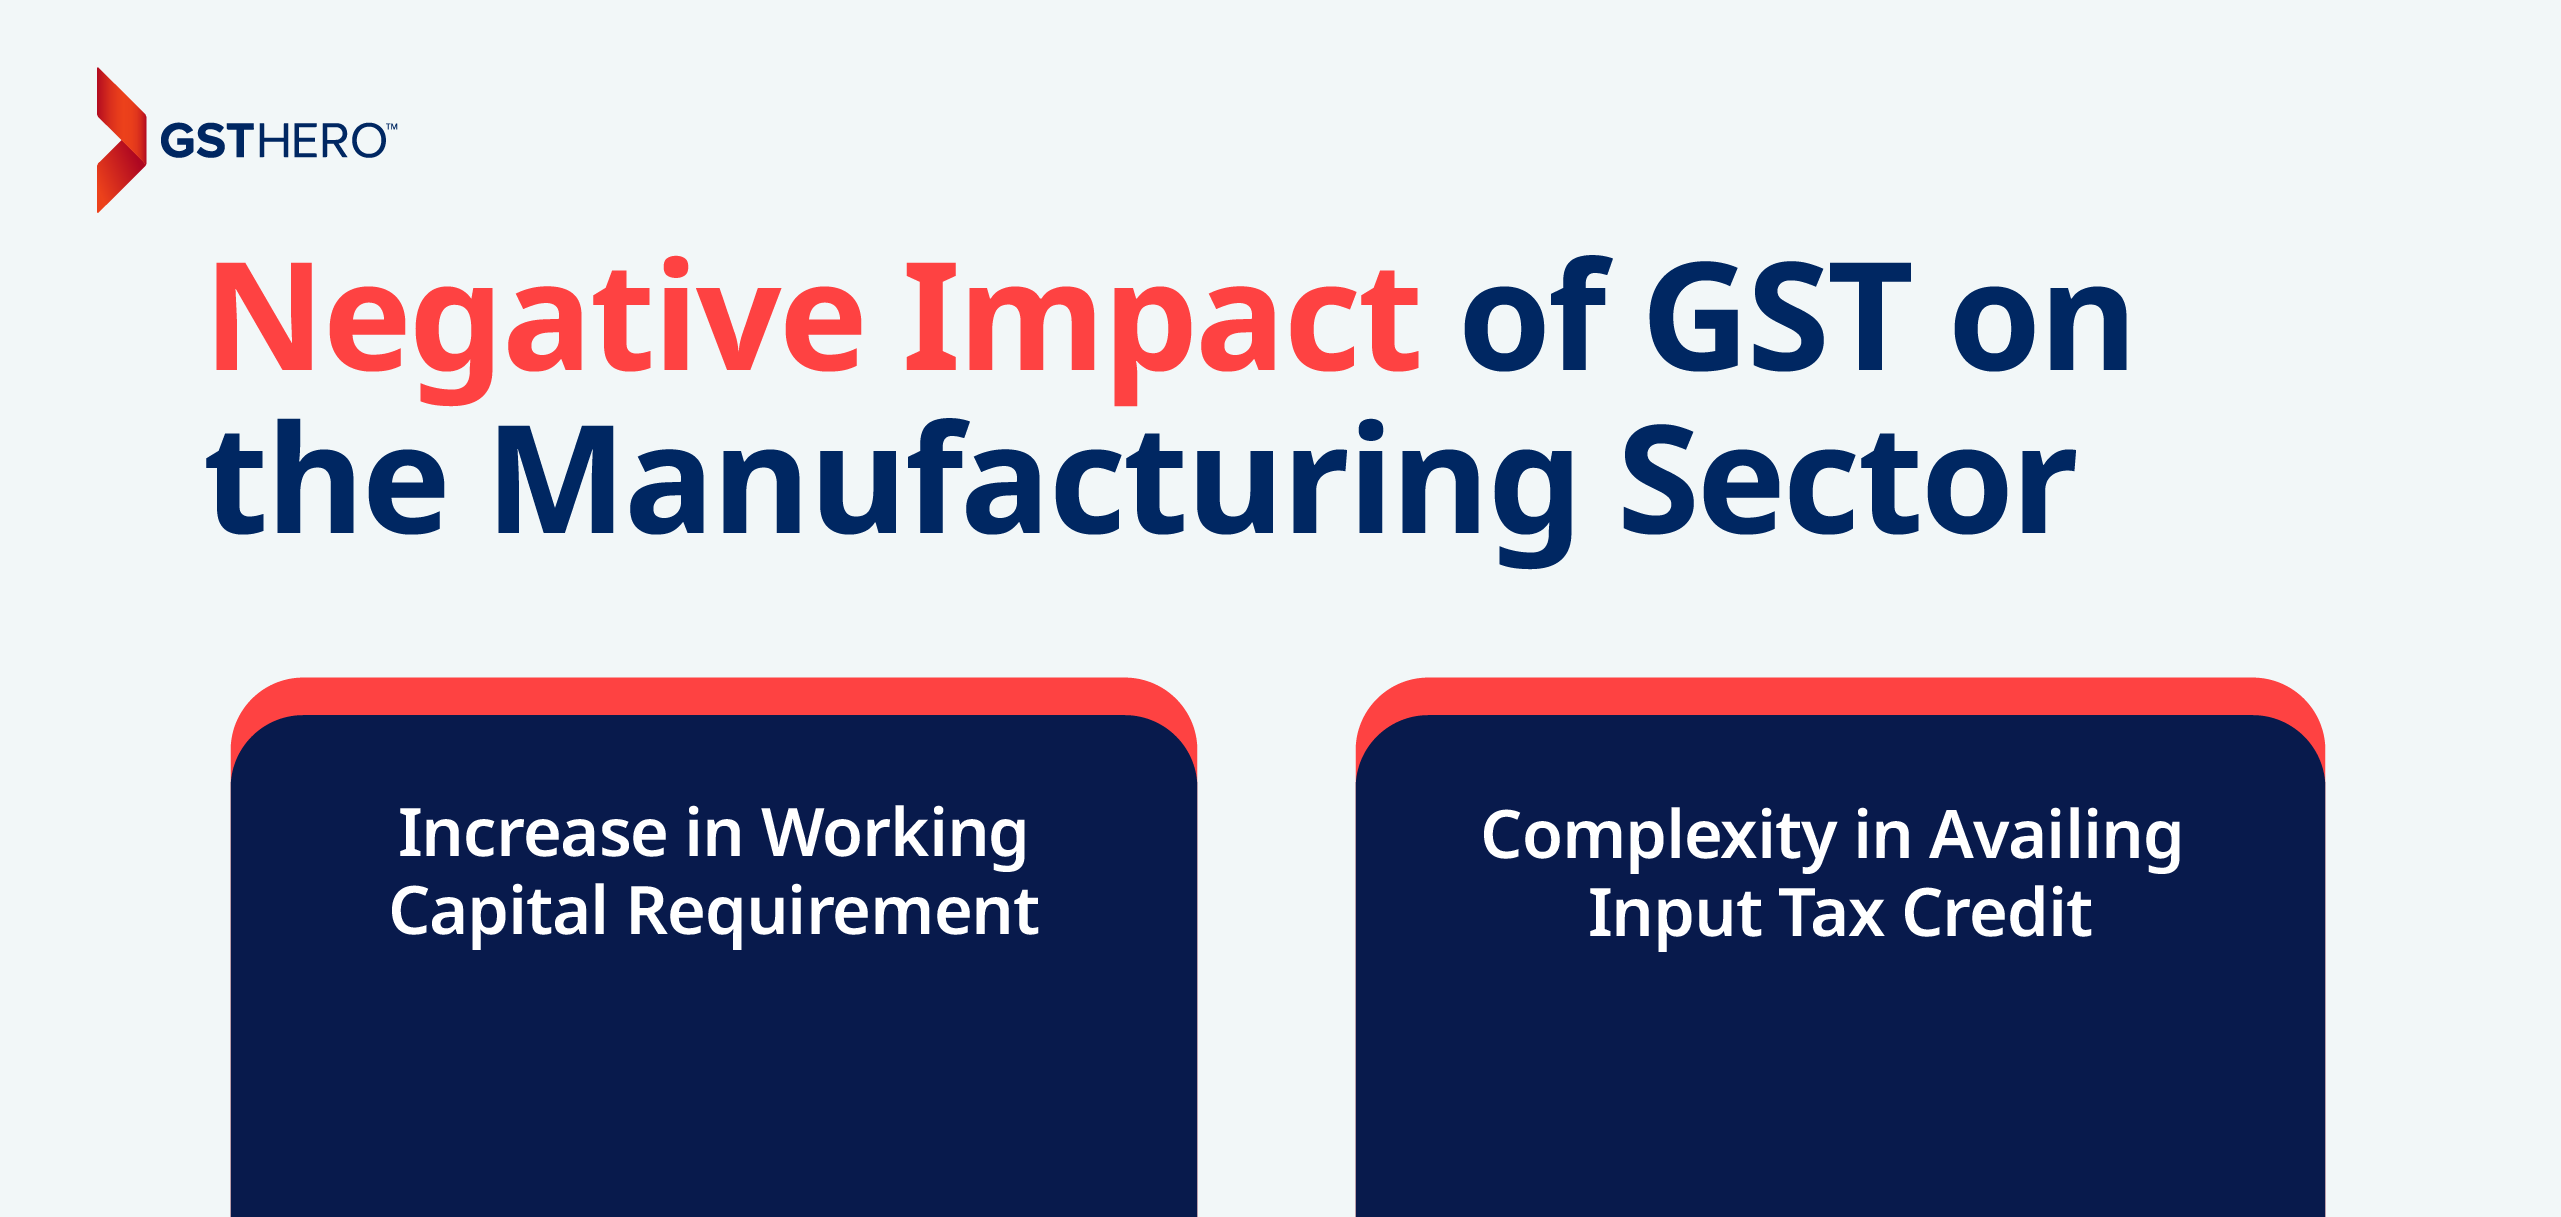 Negative Impact of GST on the Manufacturing Sector